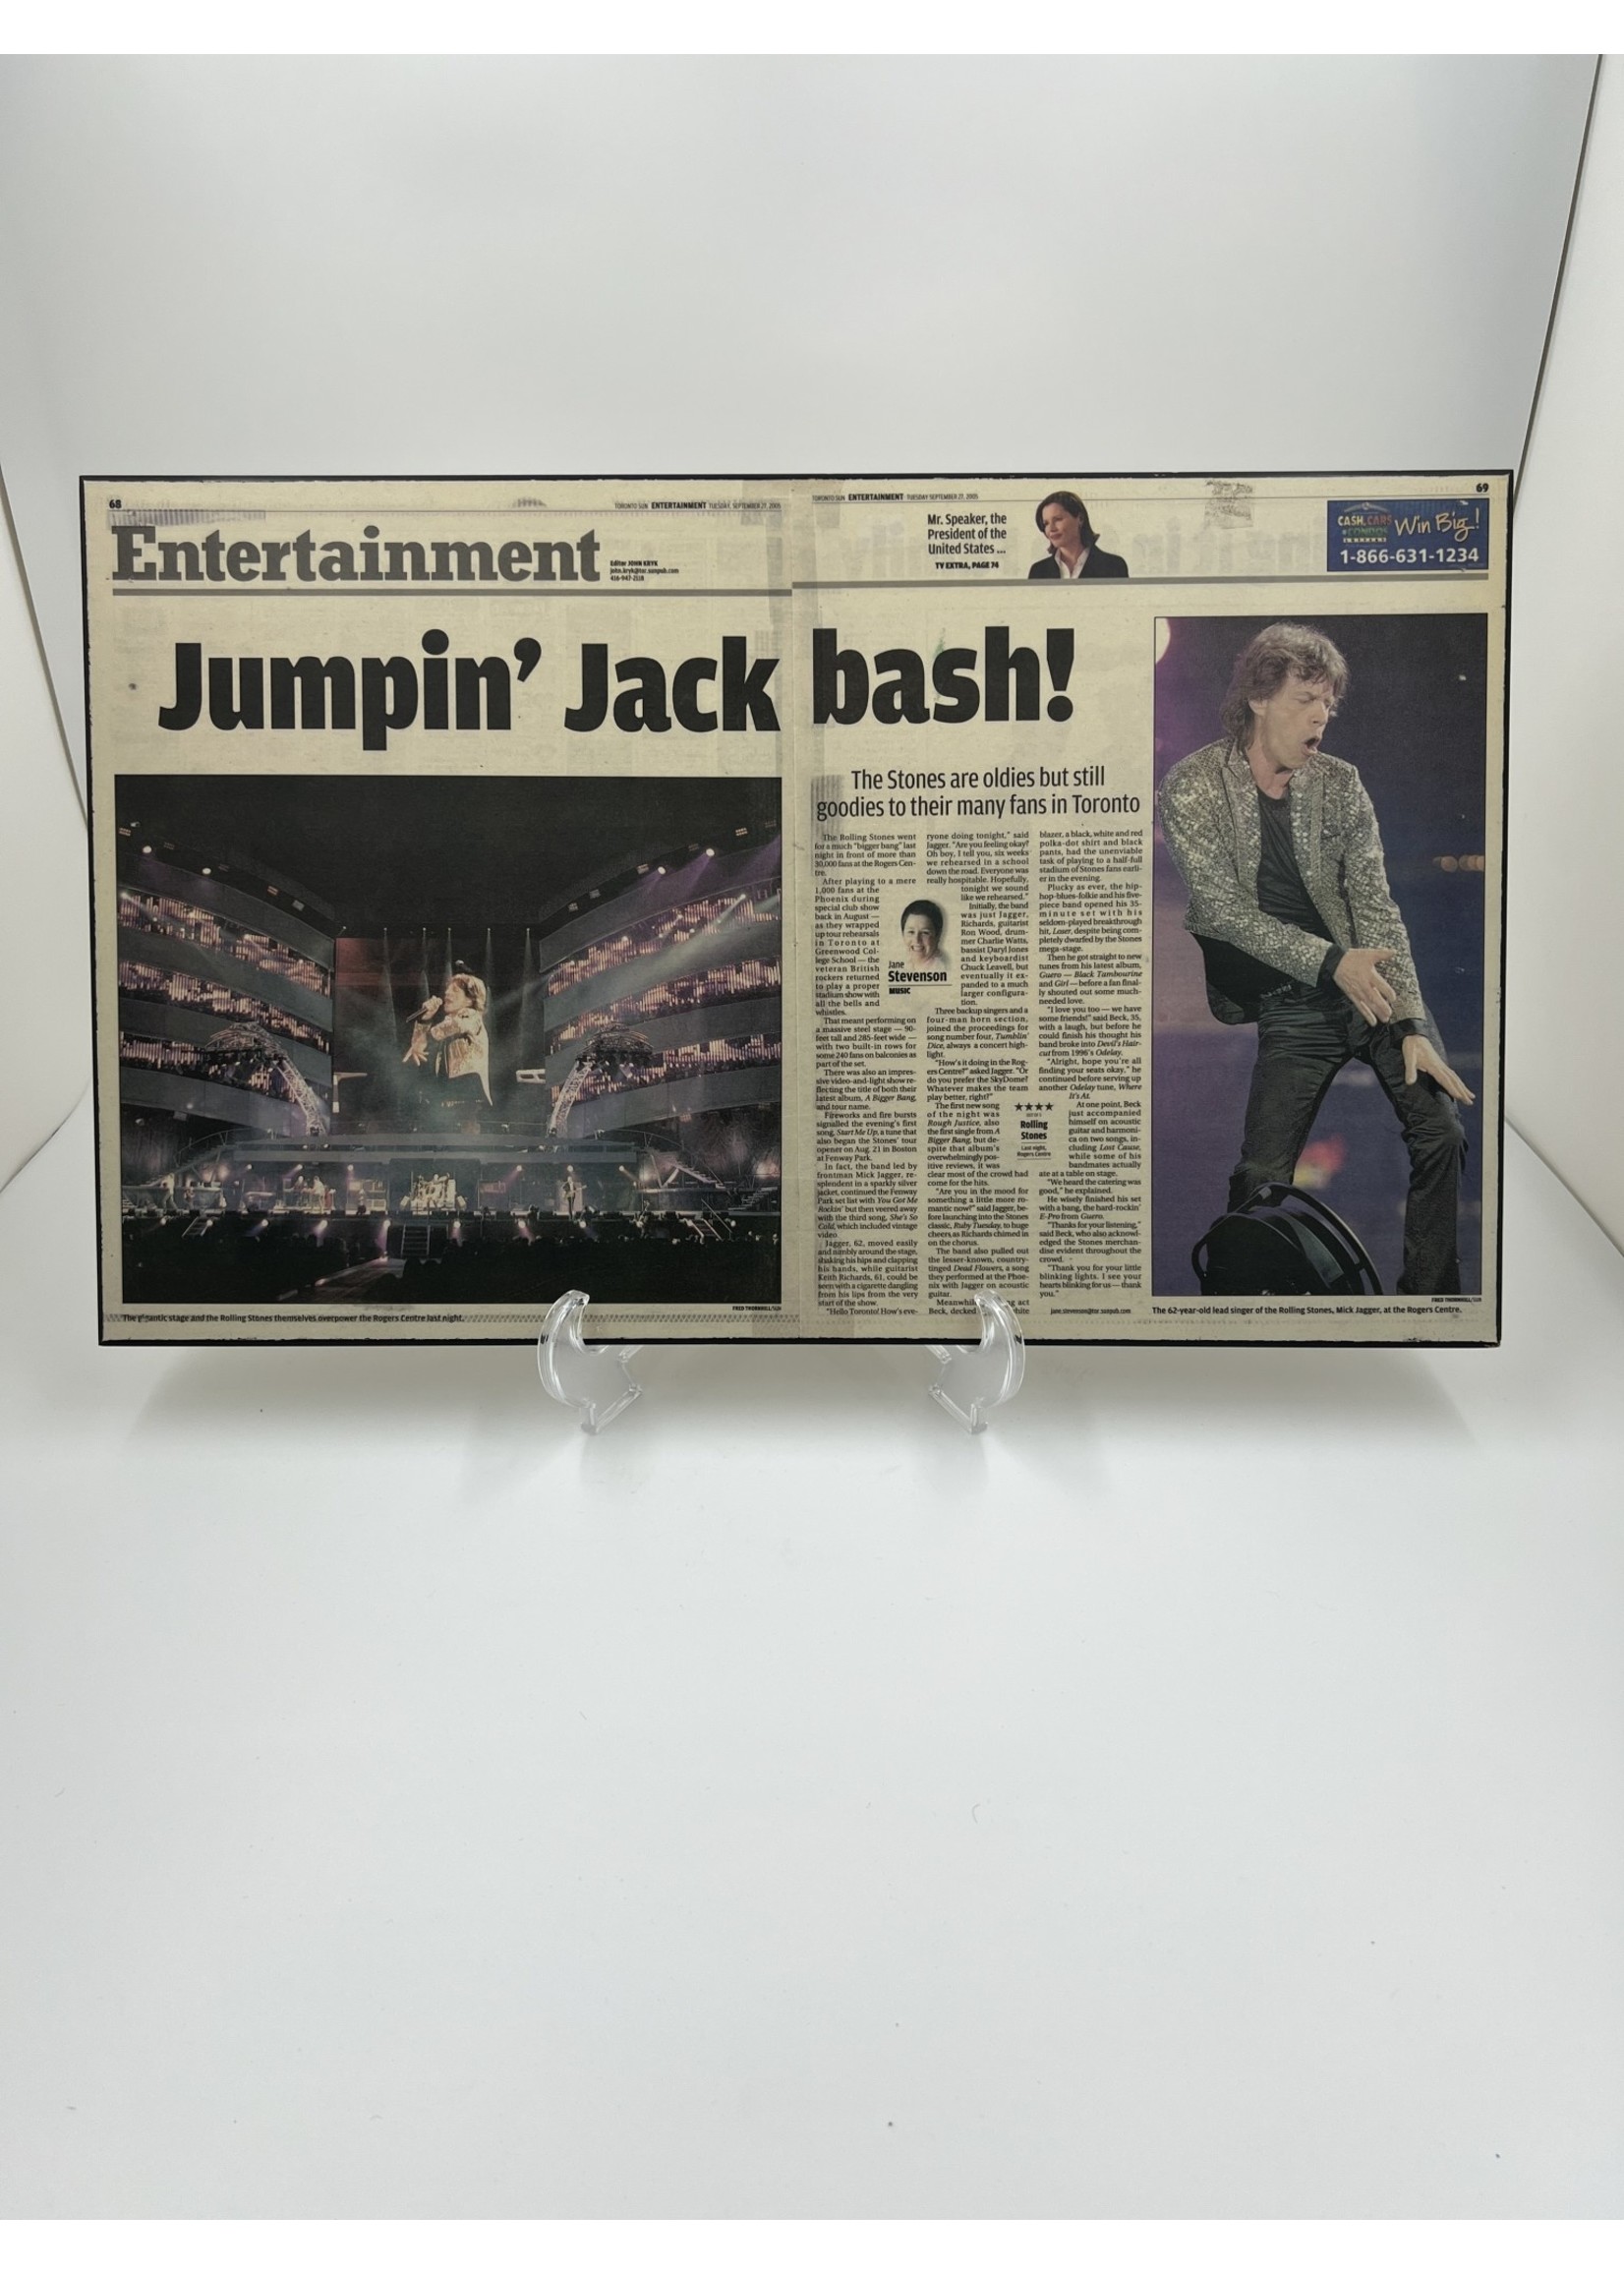 Other Things Jumpin Jack Bash Toronto Sun News Article on MDF